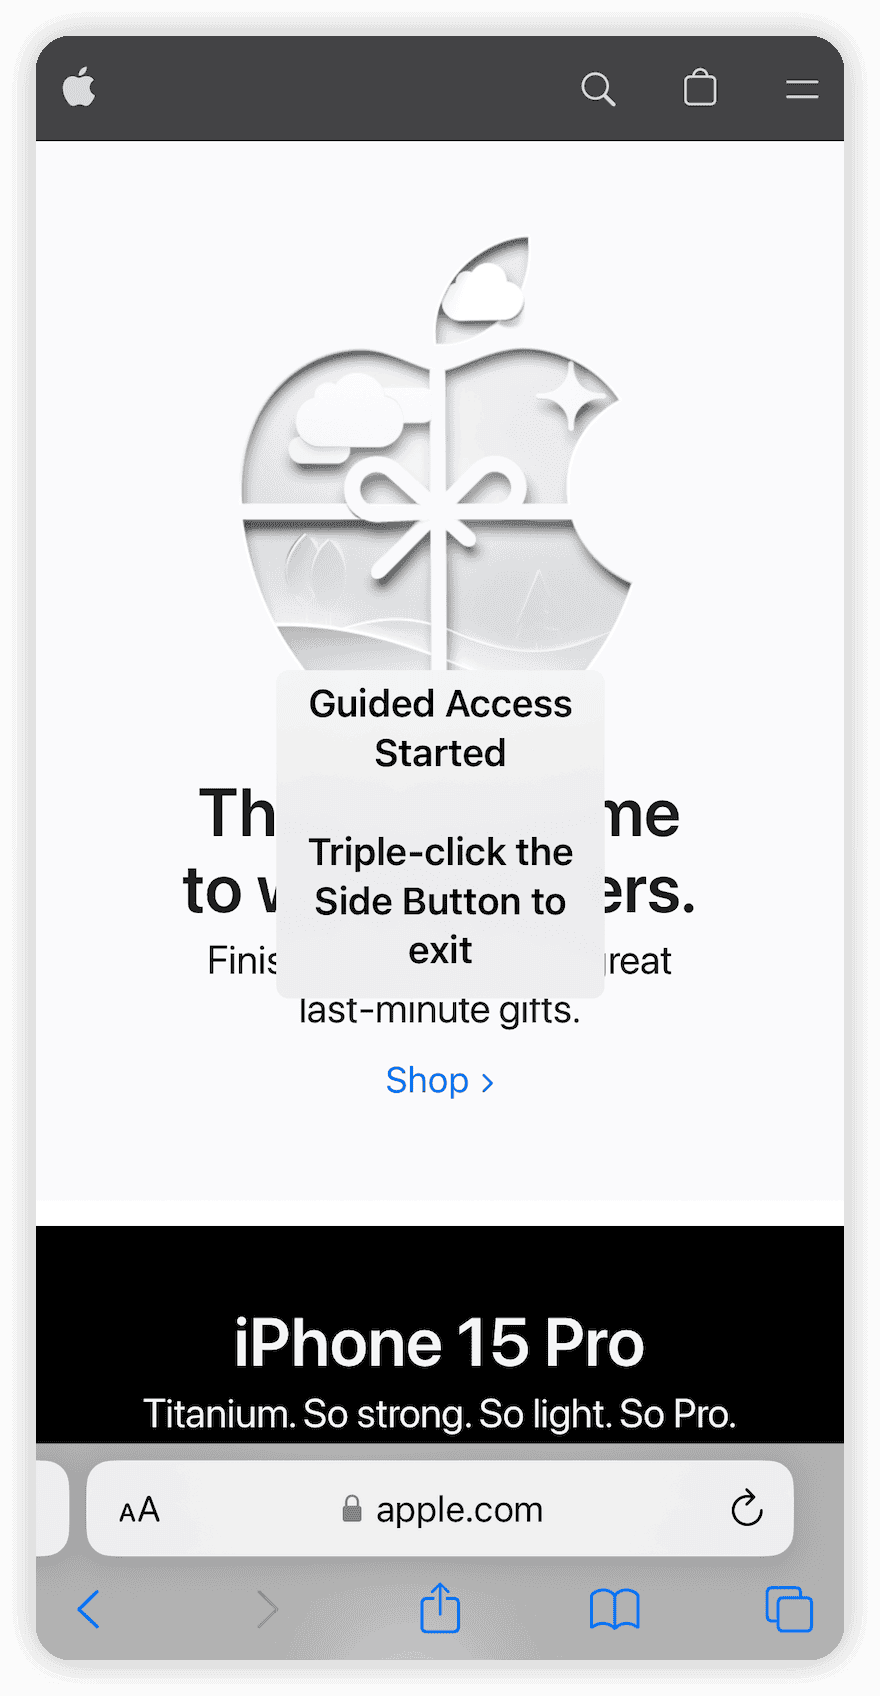 Triple-click the Side Button to exit